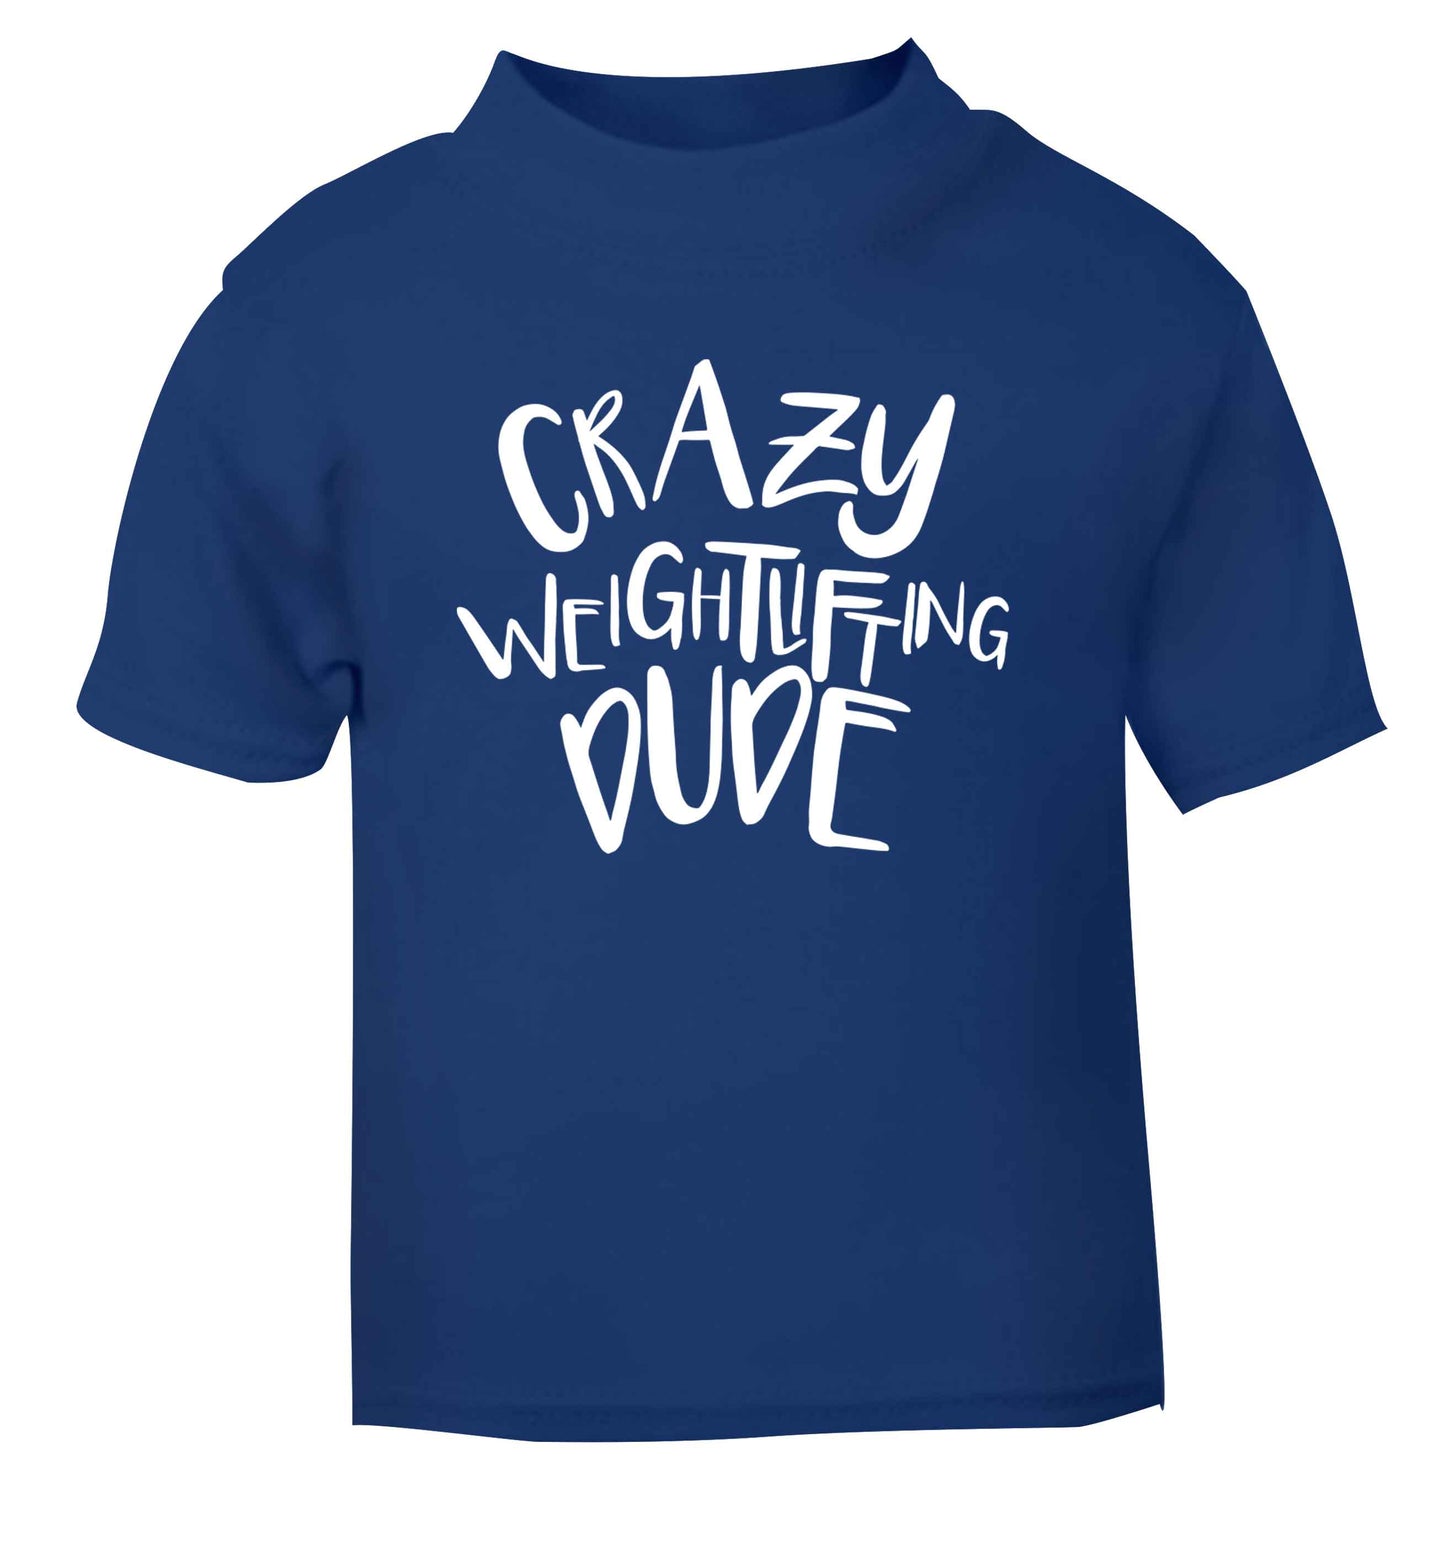 Crazy weightlifting dude blue Baby Toddler Tshirt 2 Years